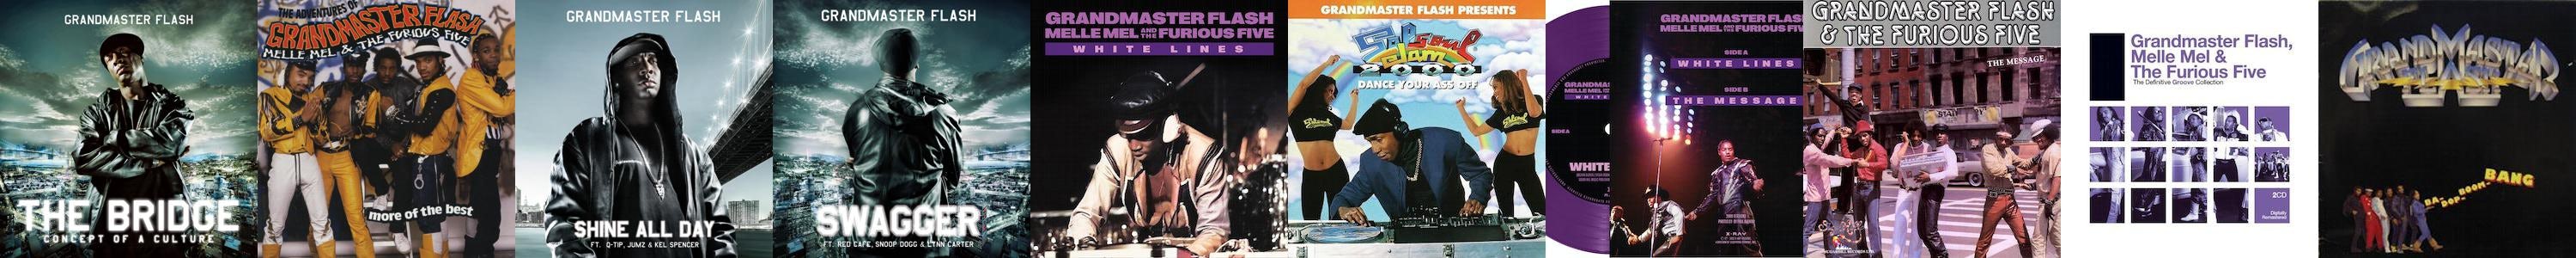 Grandmaster Flash, Melle Mel & The Furious Five – Sugarhill Adventures –  The Collection (9 CD Box Set Import) – Cleopatra Records Store